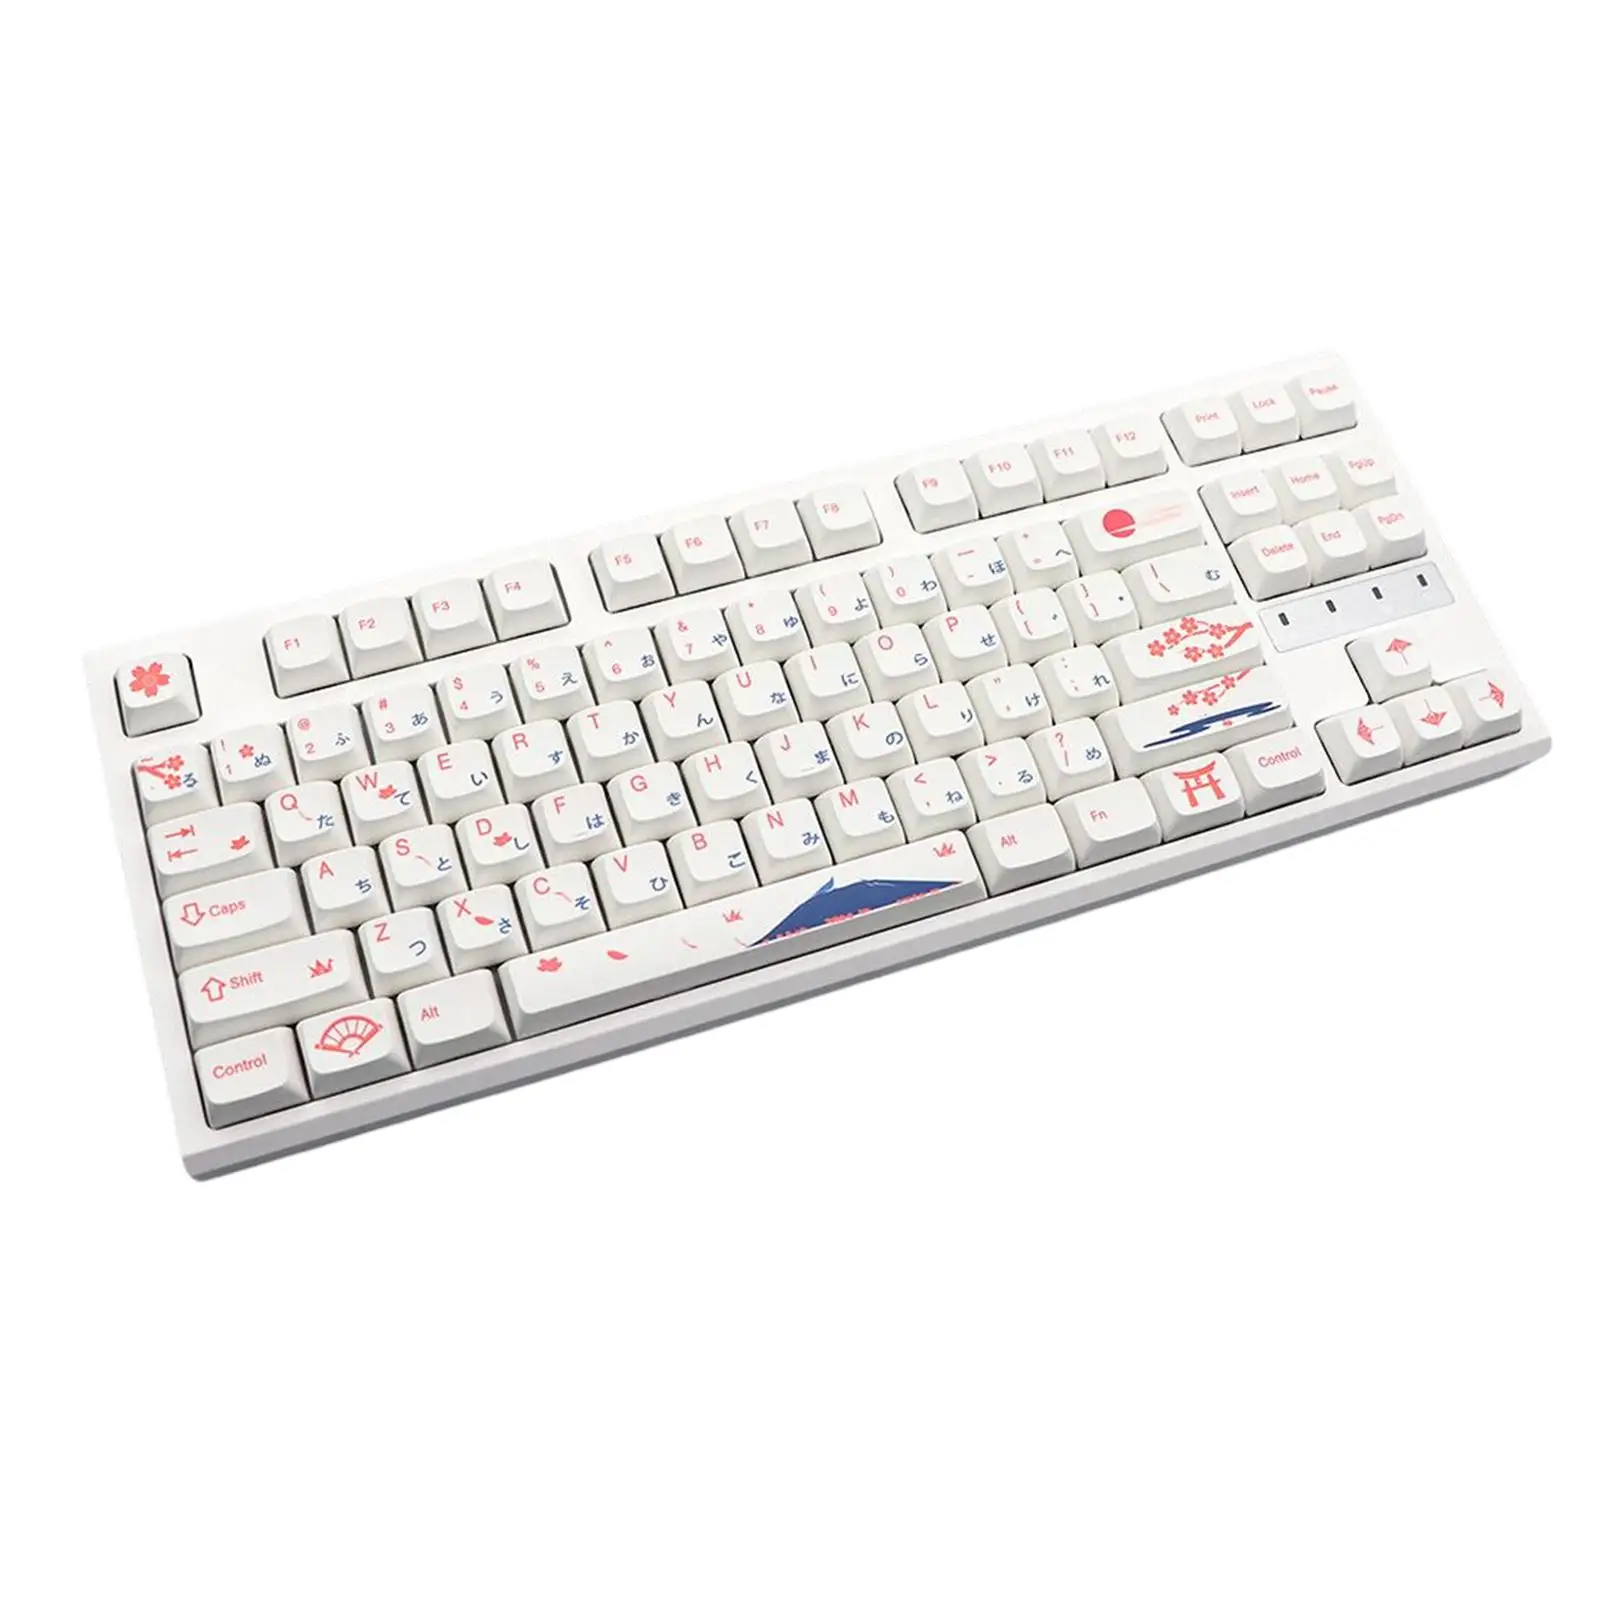 130 Keys Keycaps Xda Profile PBT Sakura Themed Style for Mechanical Keyboards Accessories